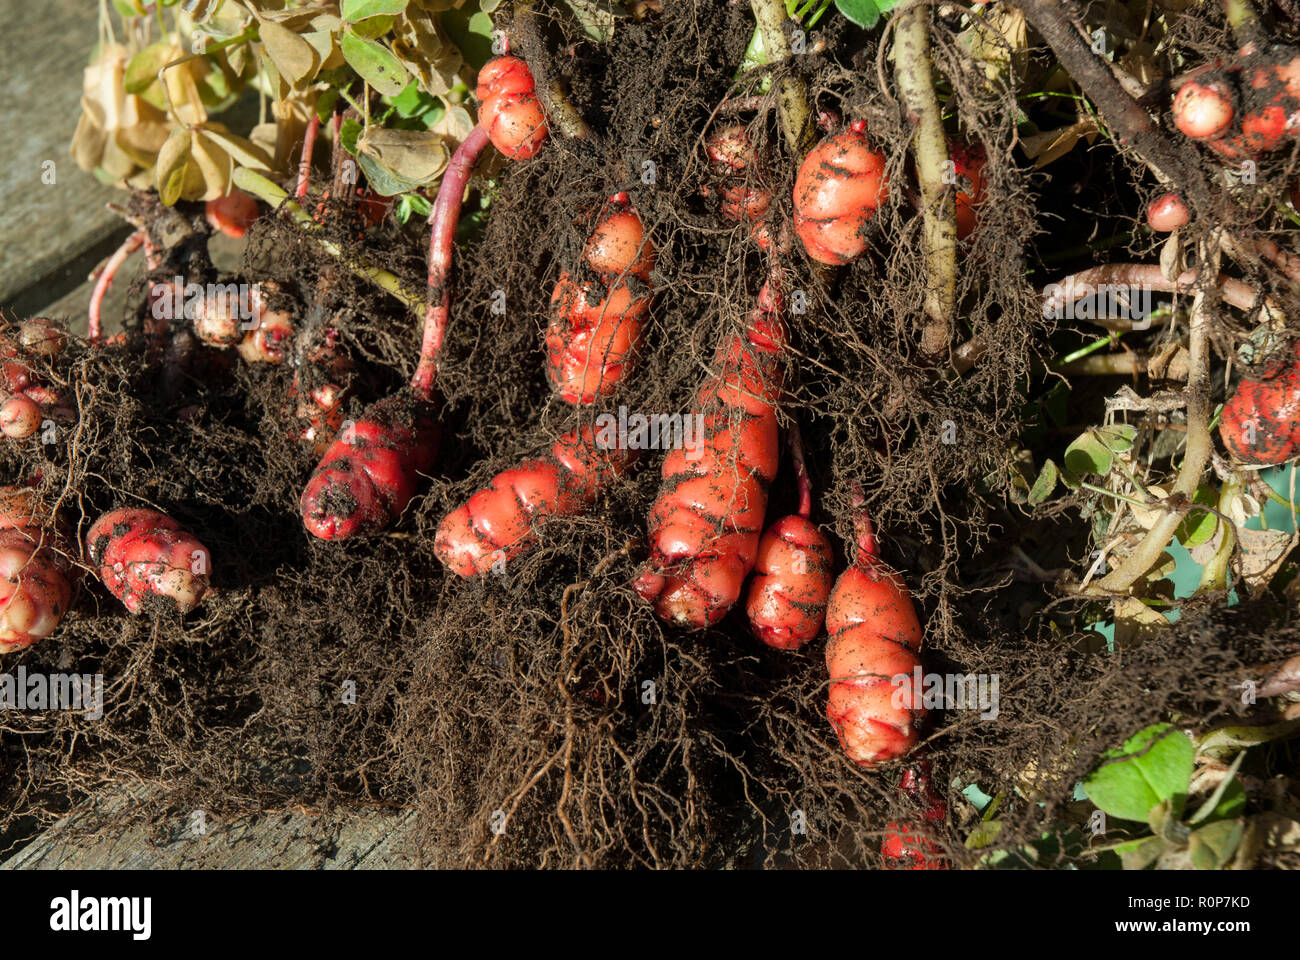 Tubers of bright pink/ red New Zealand yam /oca or oxalis tuberosa being harvested from the ground with foliage and root system. Stock Photo